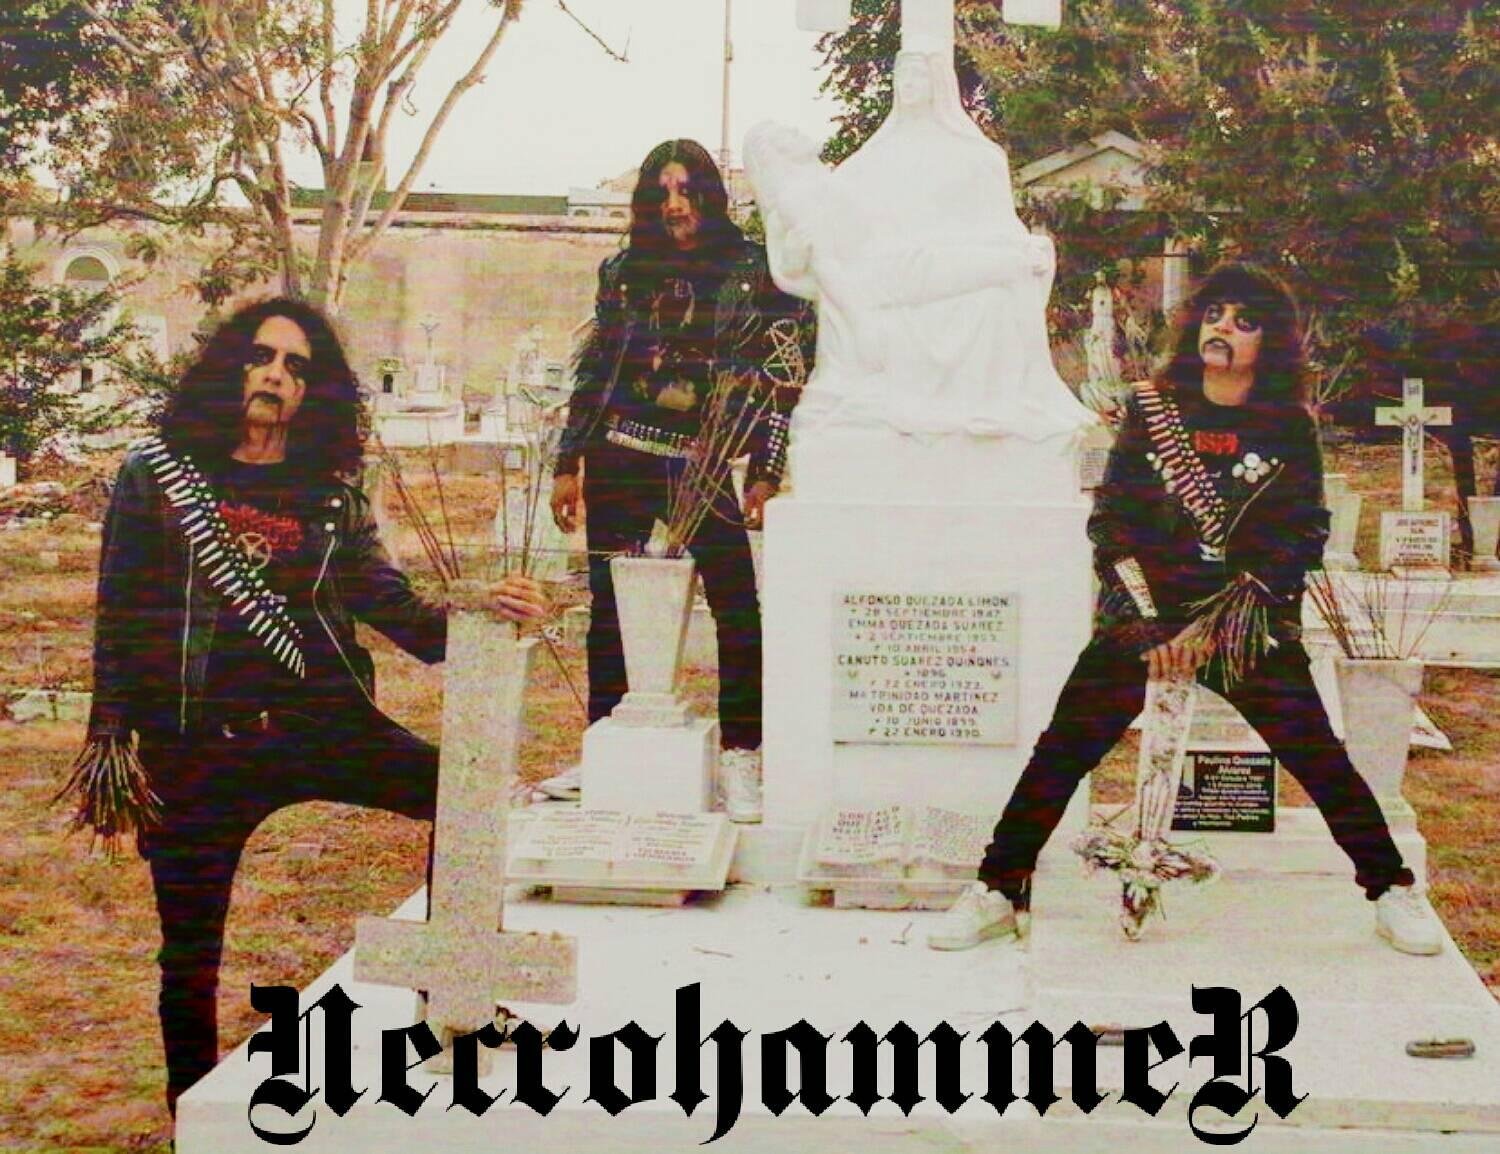 Interview with NECROHAMMER